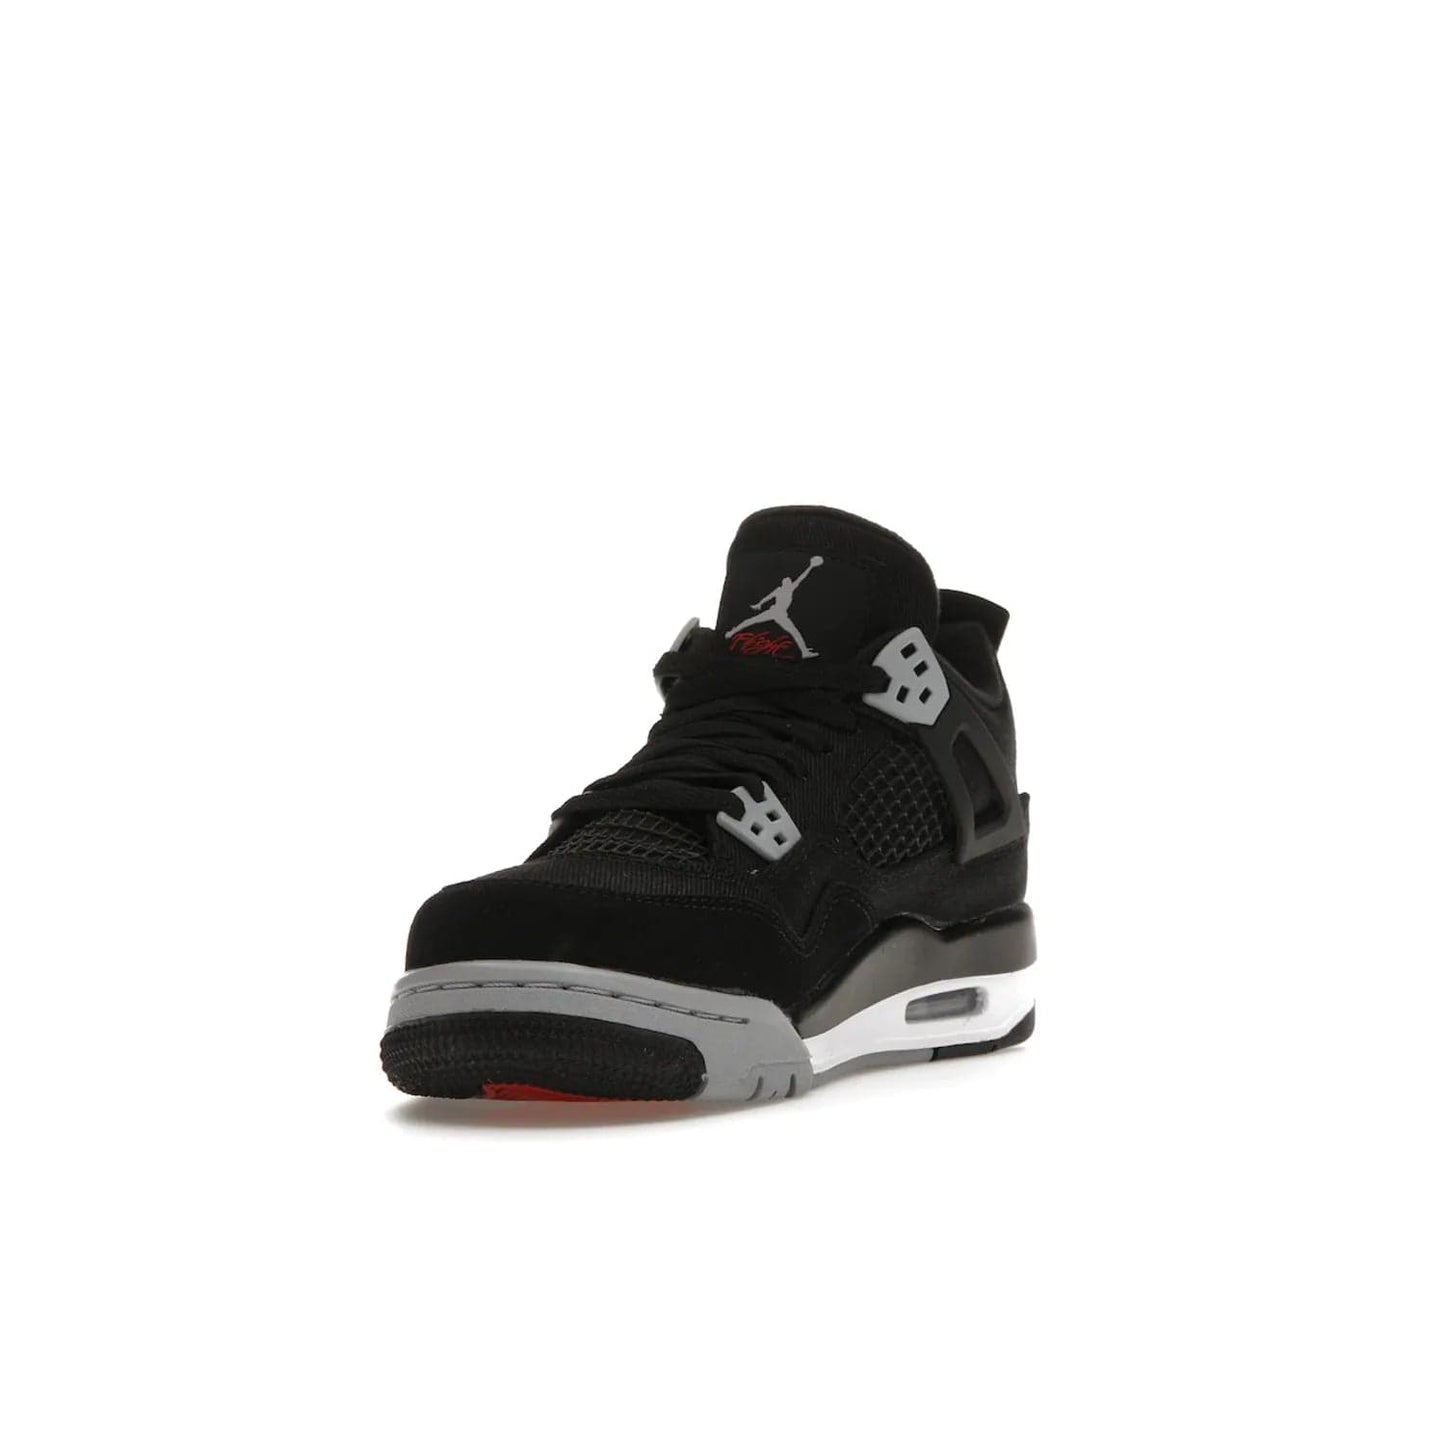 Jordan 4 Retro Black Canvas (GS) - Image 13 - Only at www.BallersClubKickz.com - Premium Air Jordan 4 Retro Black Canvas in grade-schooler's catalog. Featuring black suede canvas upper, grey molding, accents in red, white midsole, woven Jumpman tag, & visible AIR cushioning. Releasing Oct. 1, 2022.